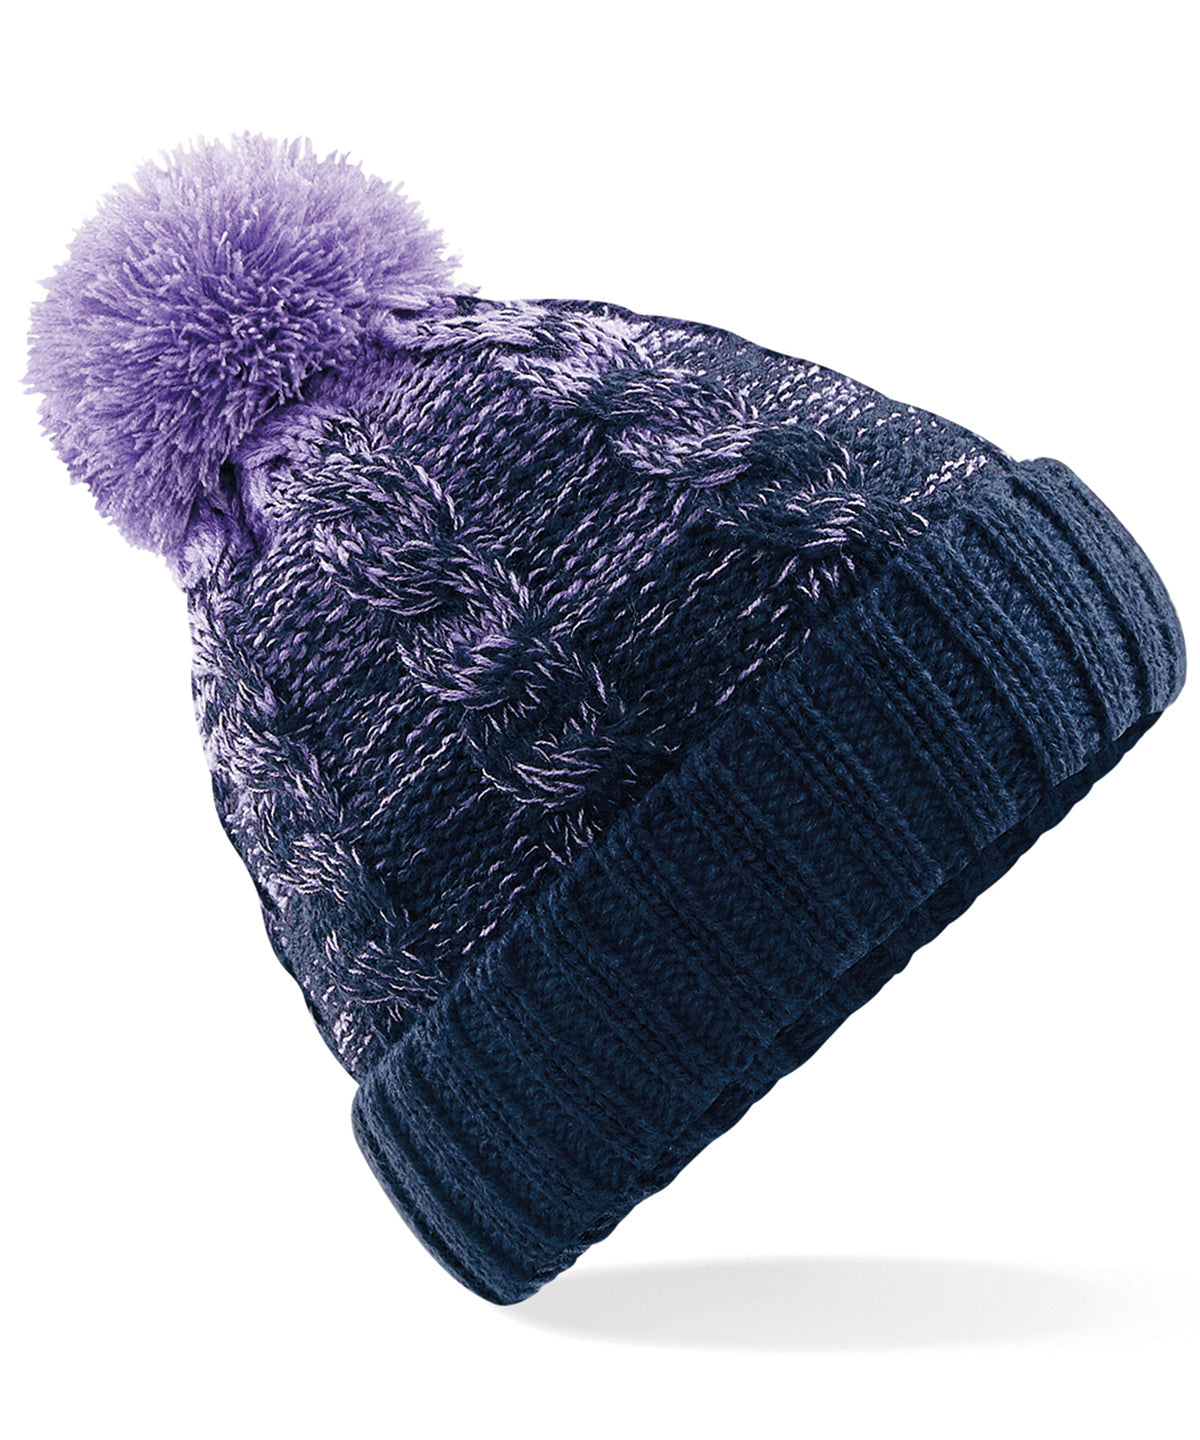 Personalised Hats - Multicolour Beechfield Ombré beanie